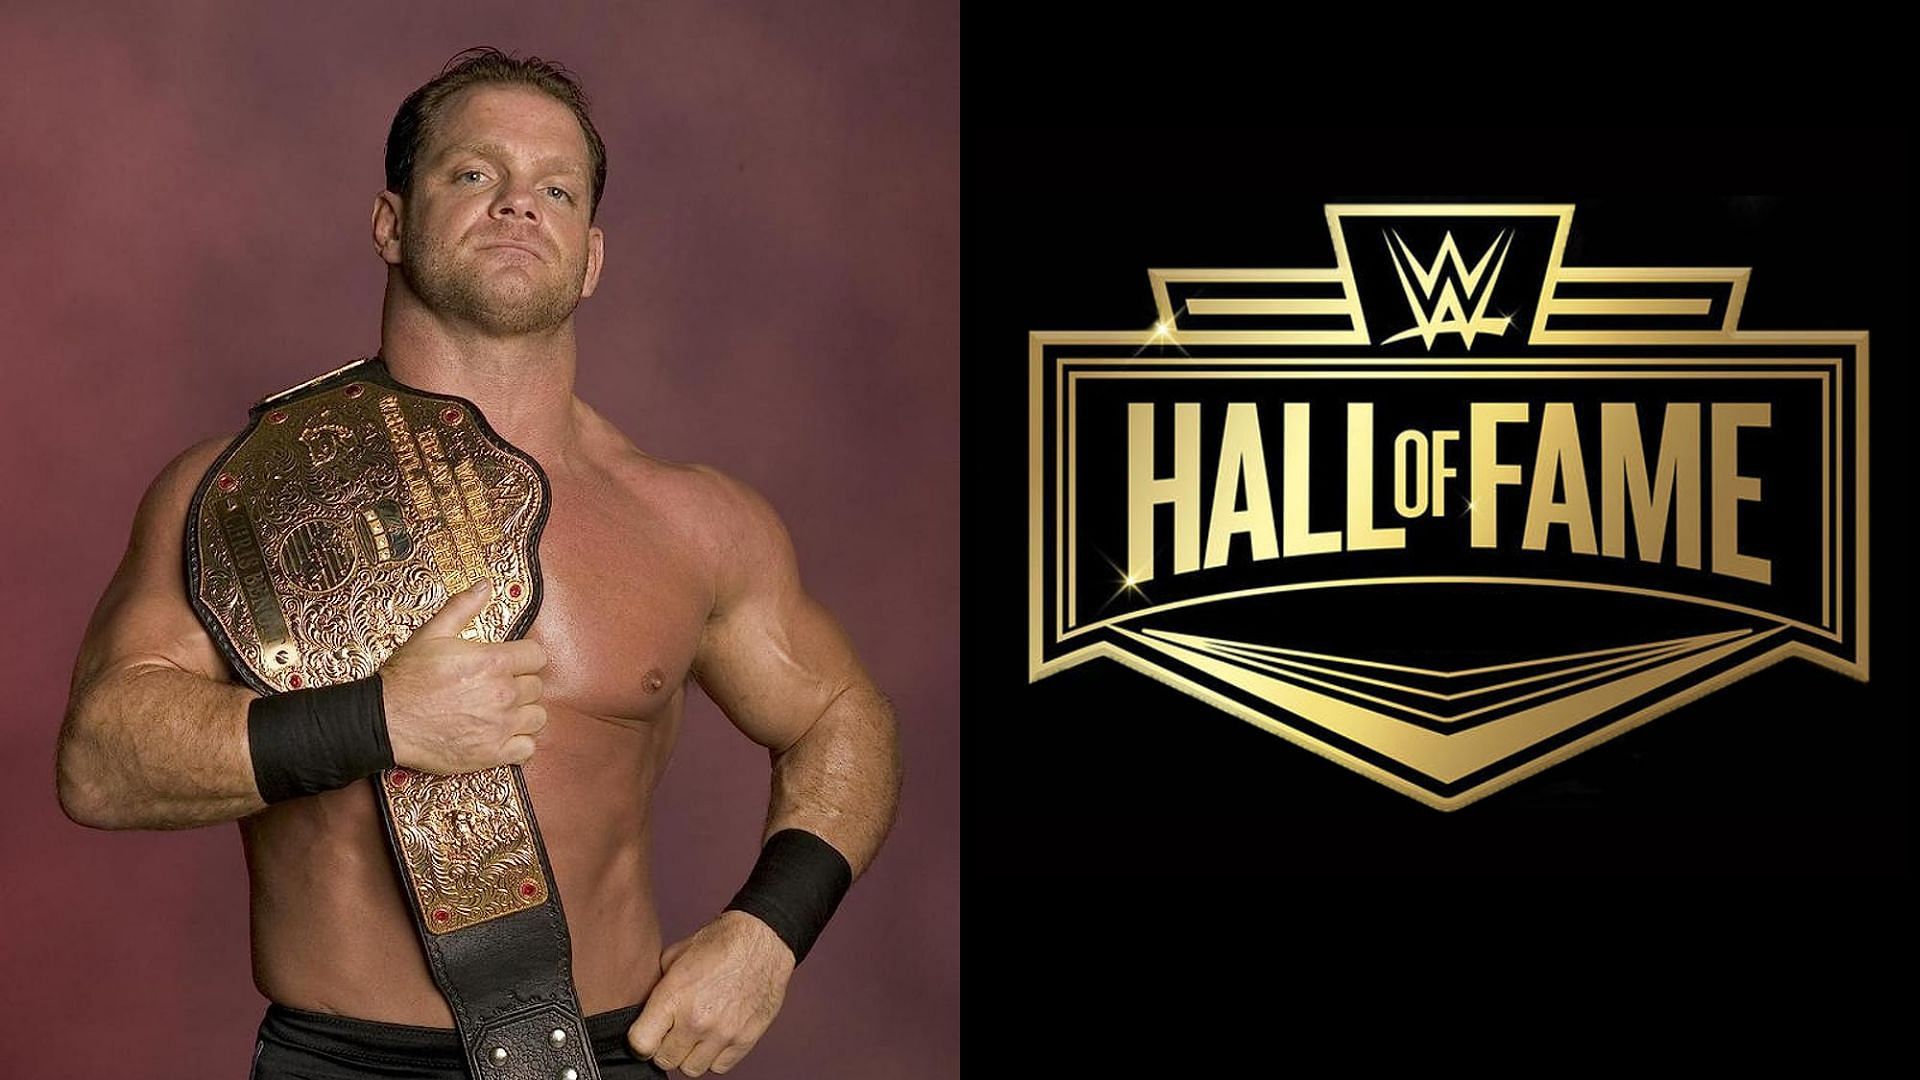 Chris Benoit is not in the WWE Hall of Fame!